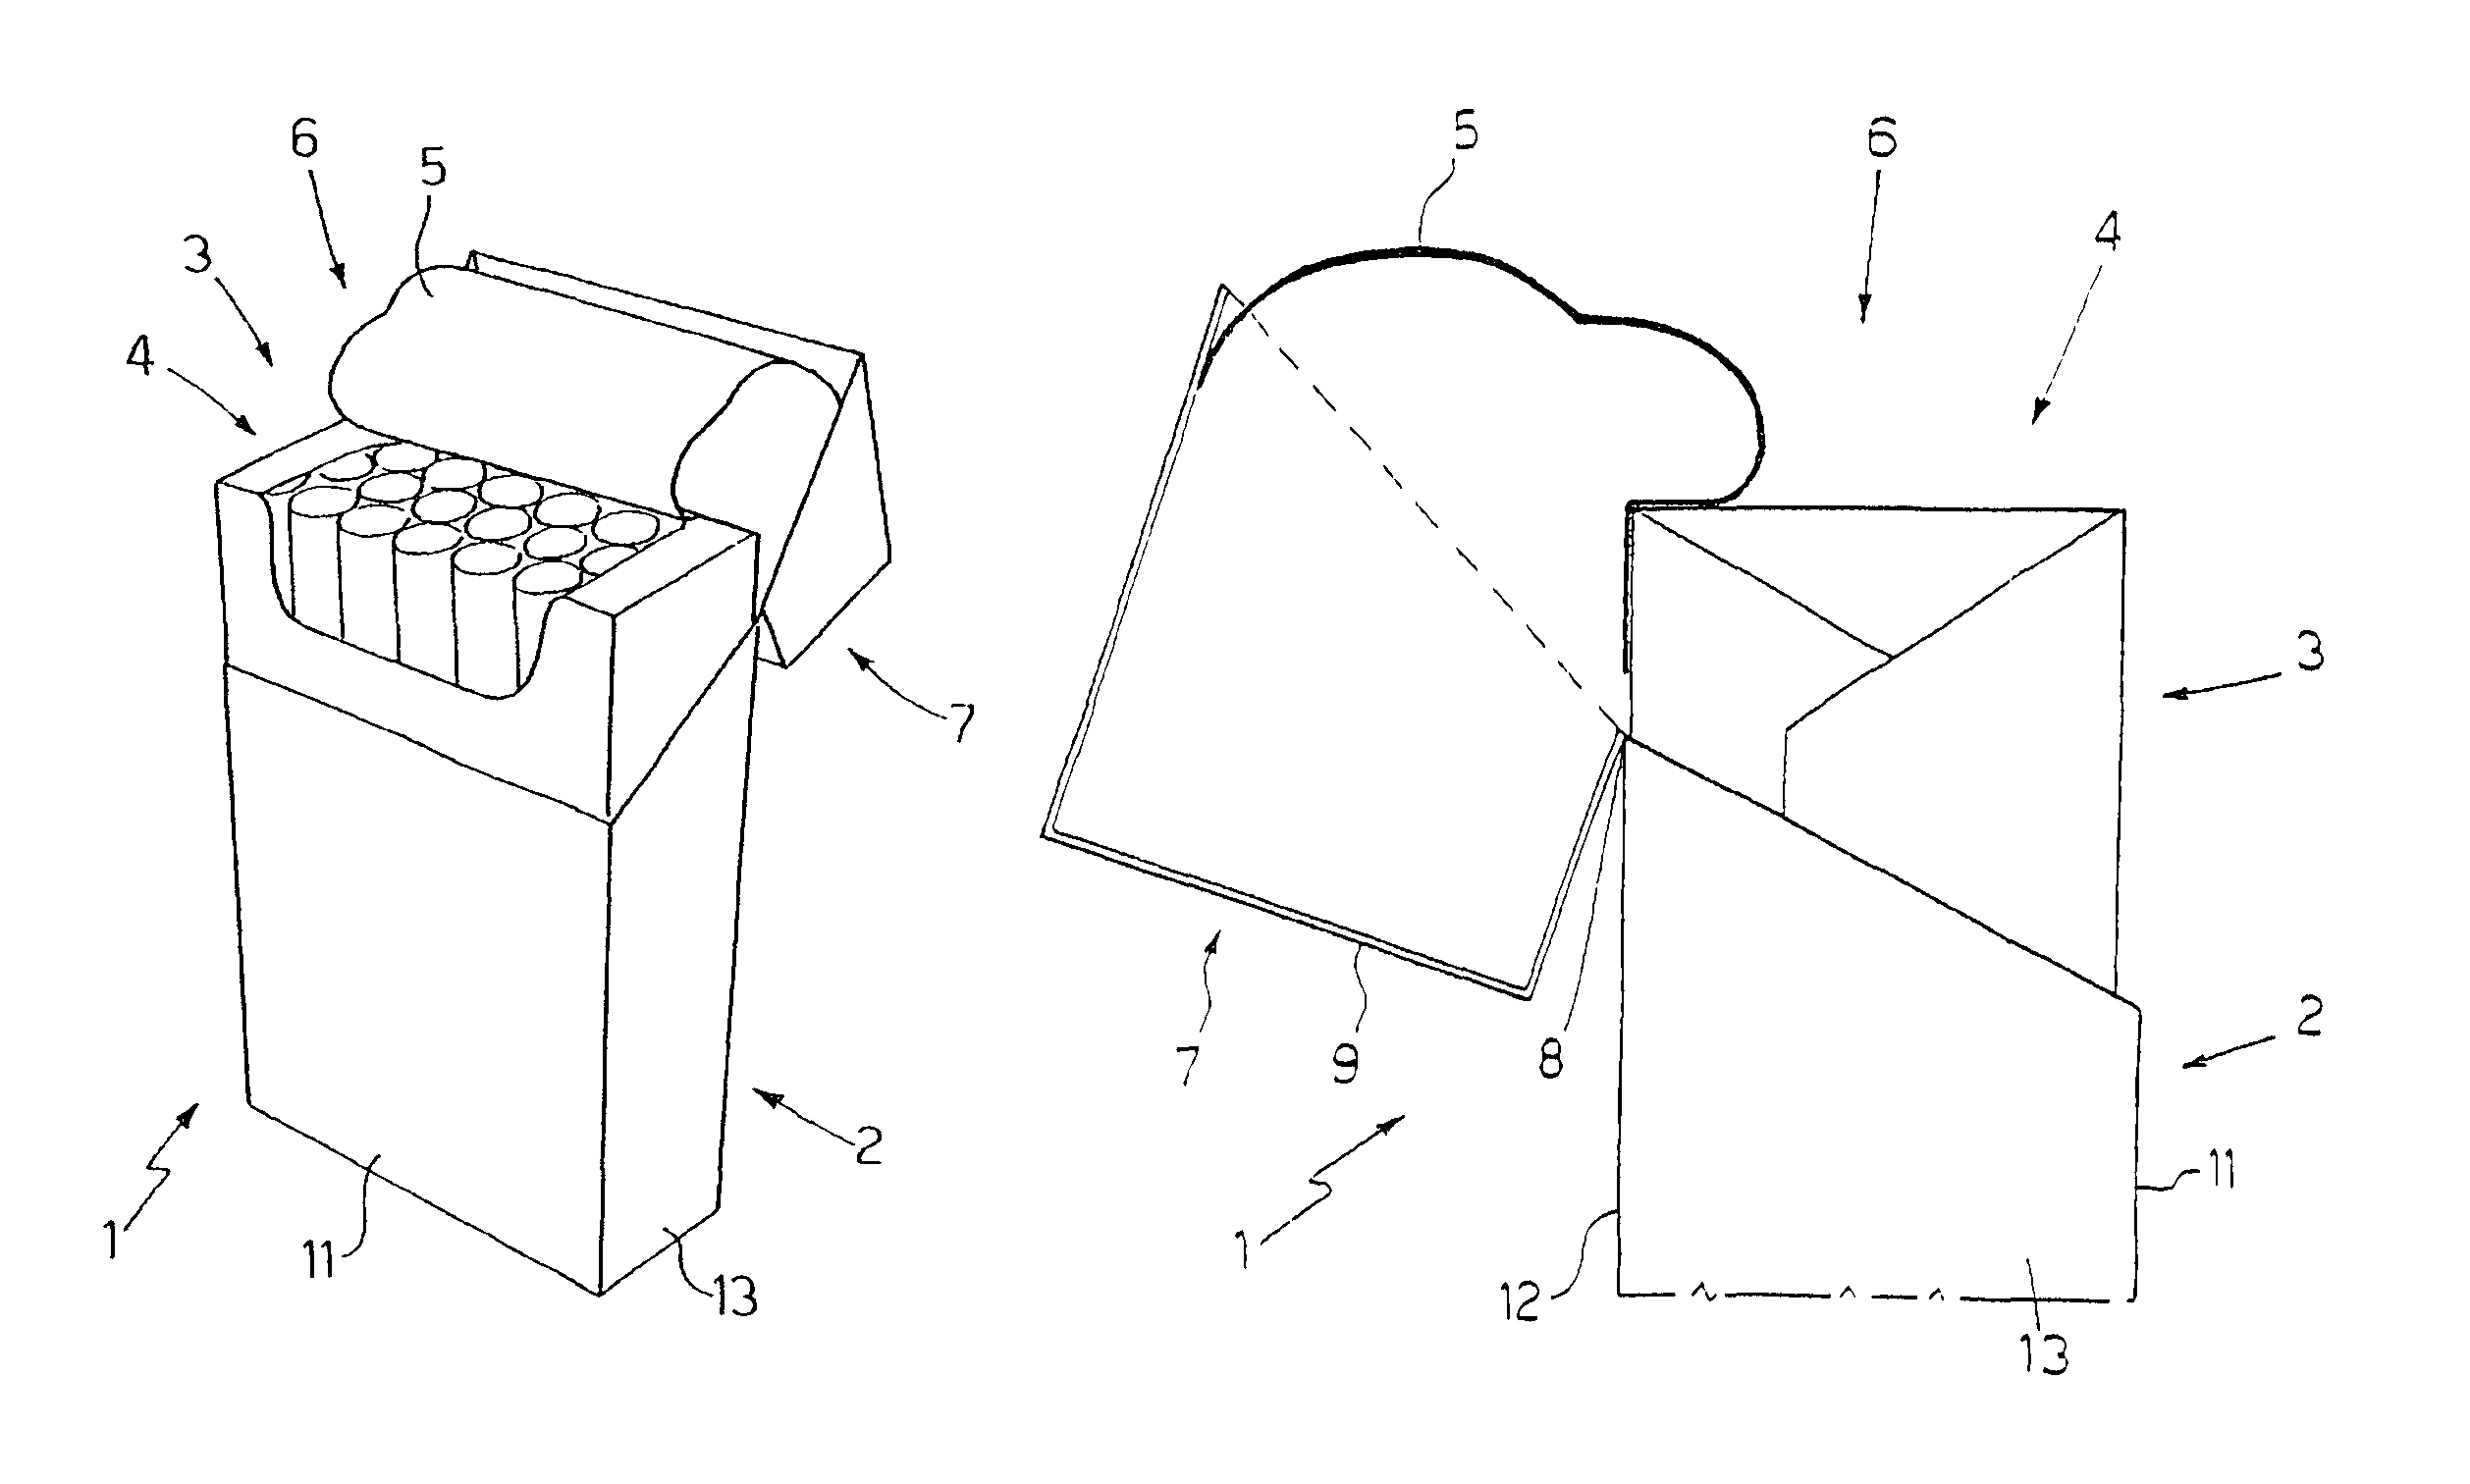 Package of tobacco articles having an inner package with a cover flap fixed to a hinged lid